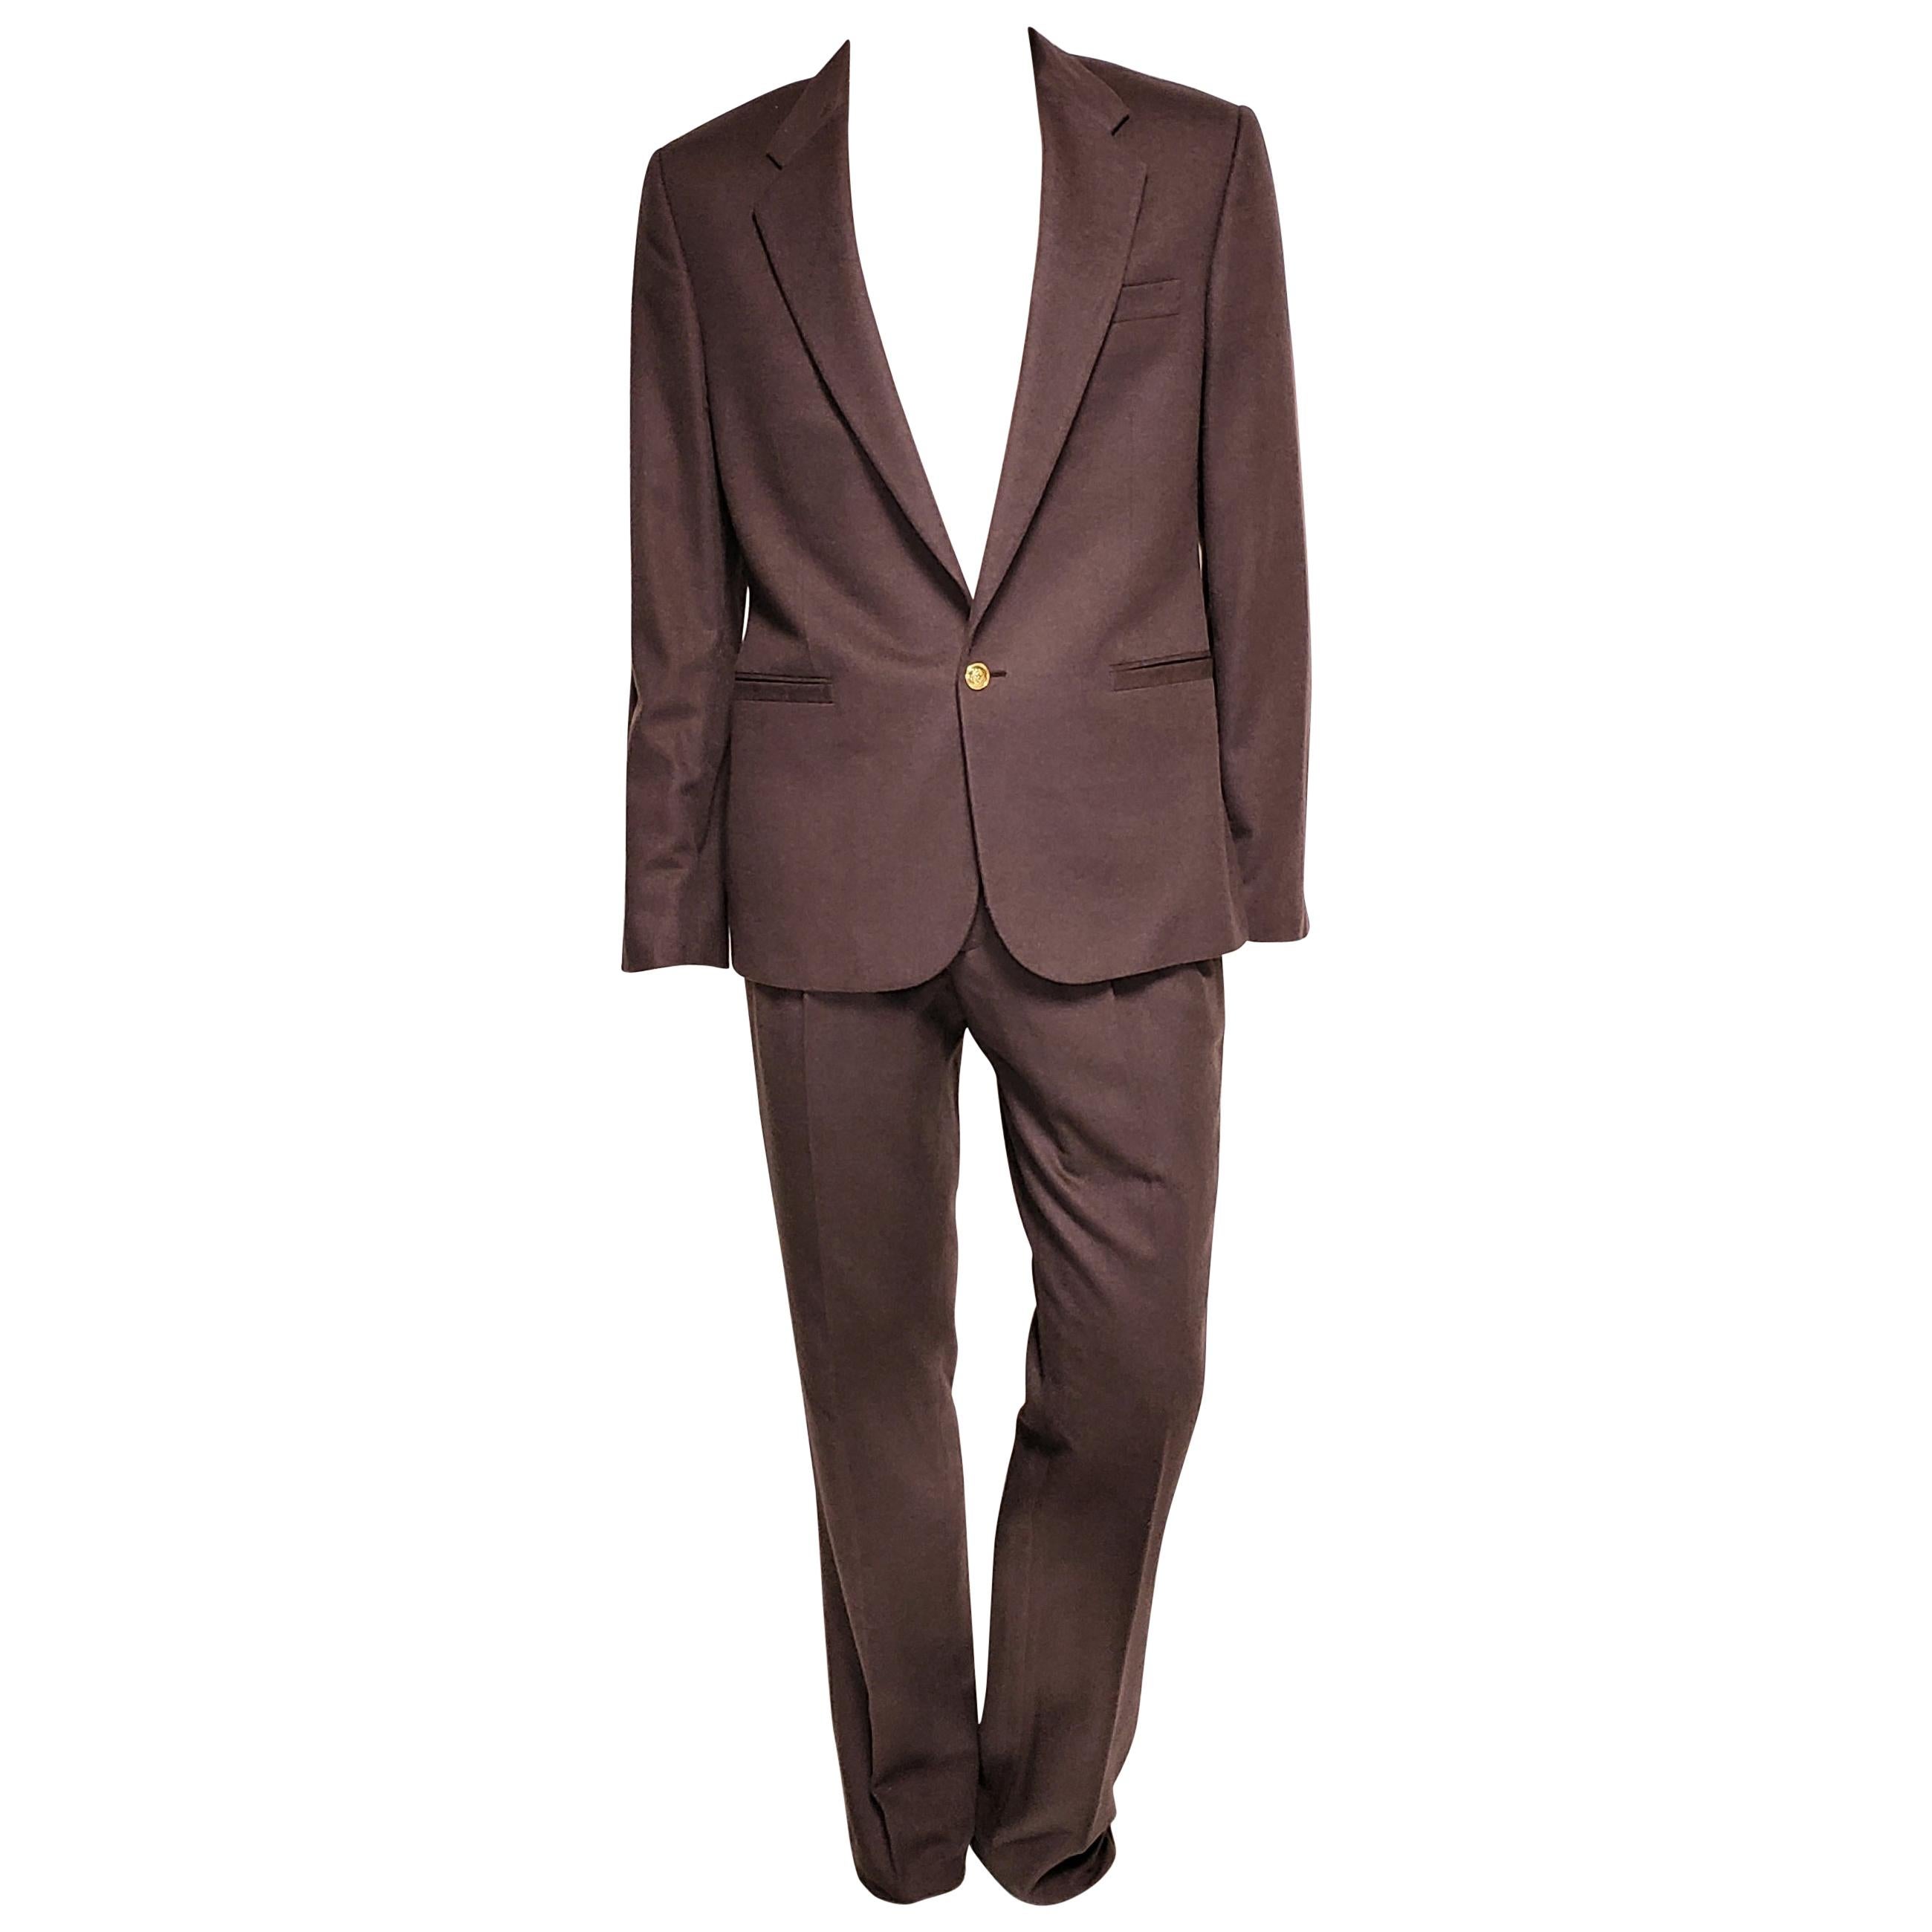 F/W 2015 look # 3 BRAND NEW VERSACE BROWN CASHMERE and SILK SUIT 50 - 40 (L) For Sale